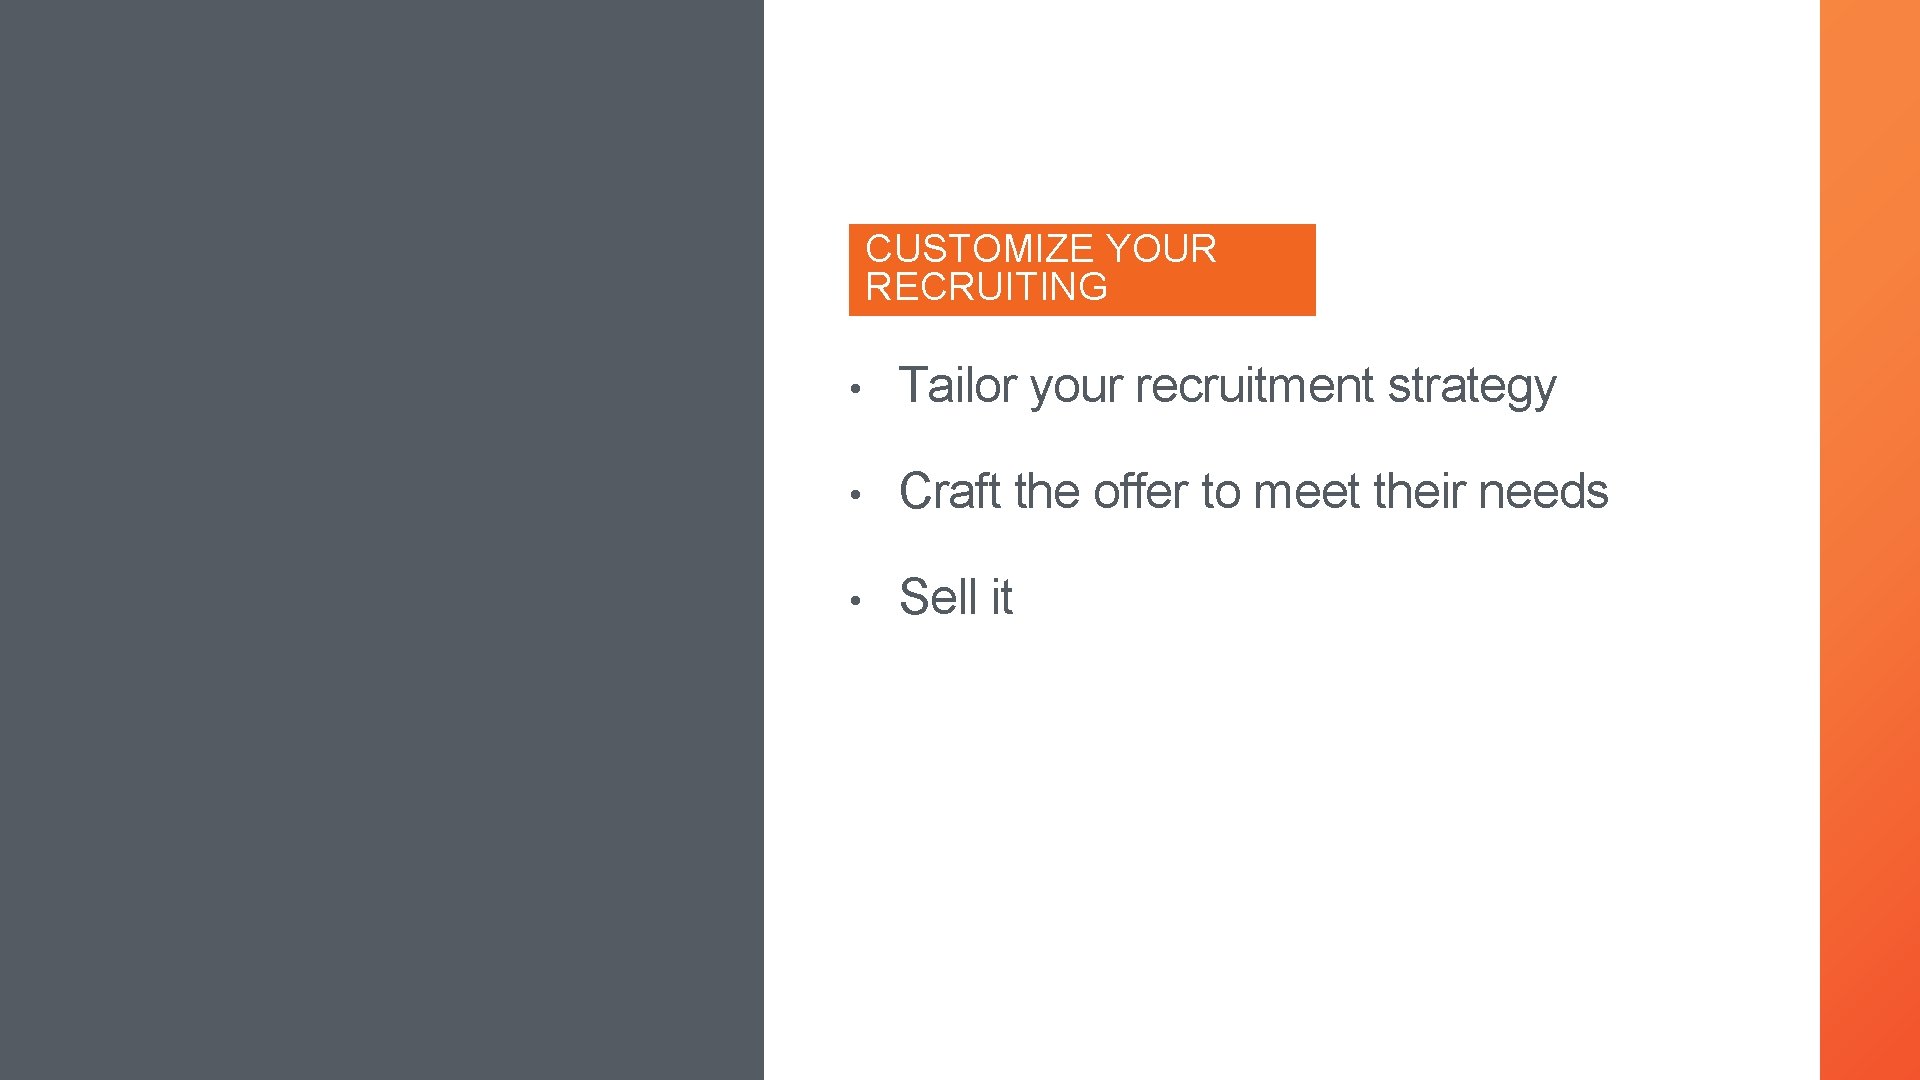 CUSTOMIZE YOUR RECRUITING • Tailor your recruitment strategy • Craft the offer to meet